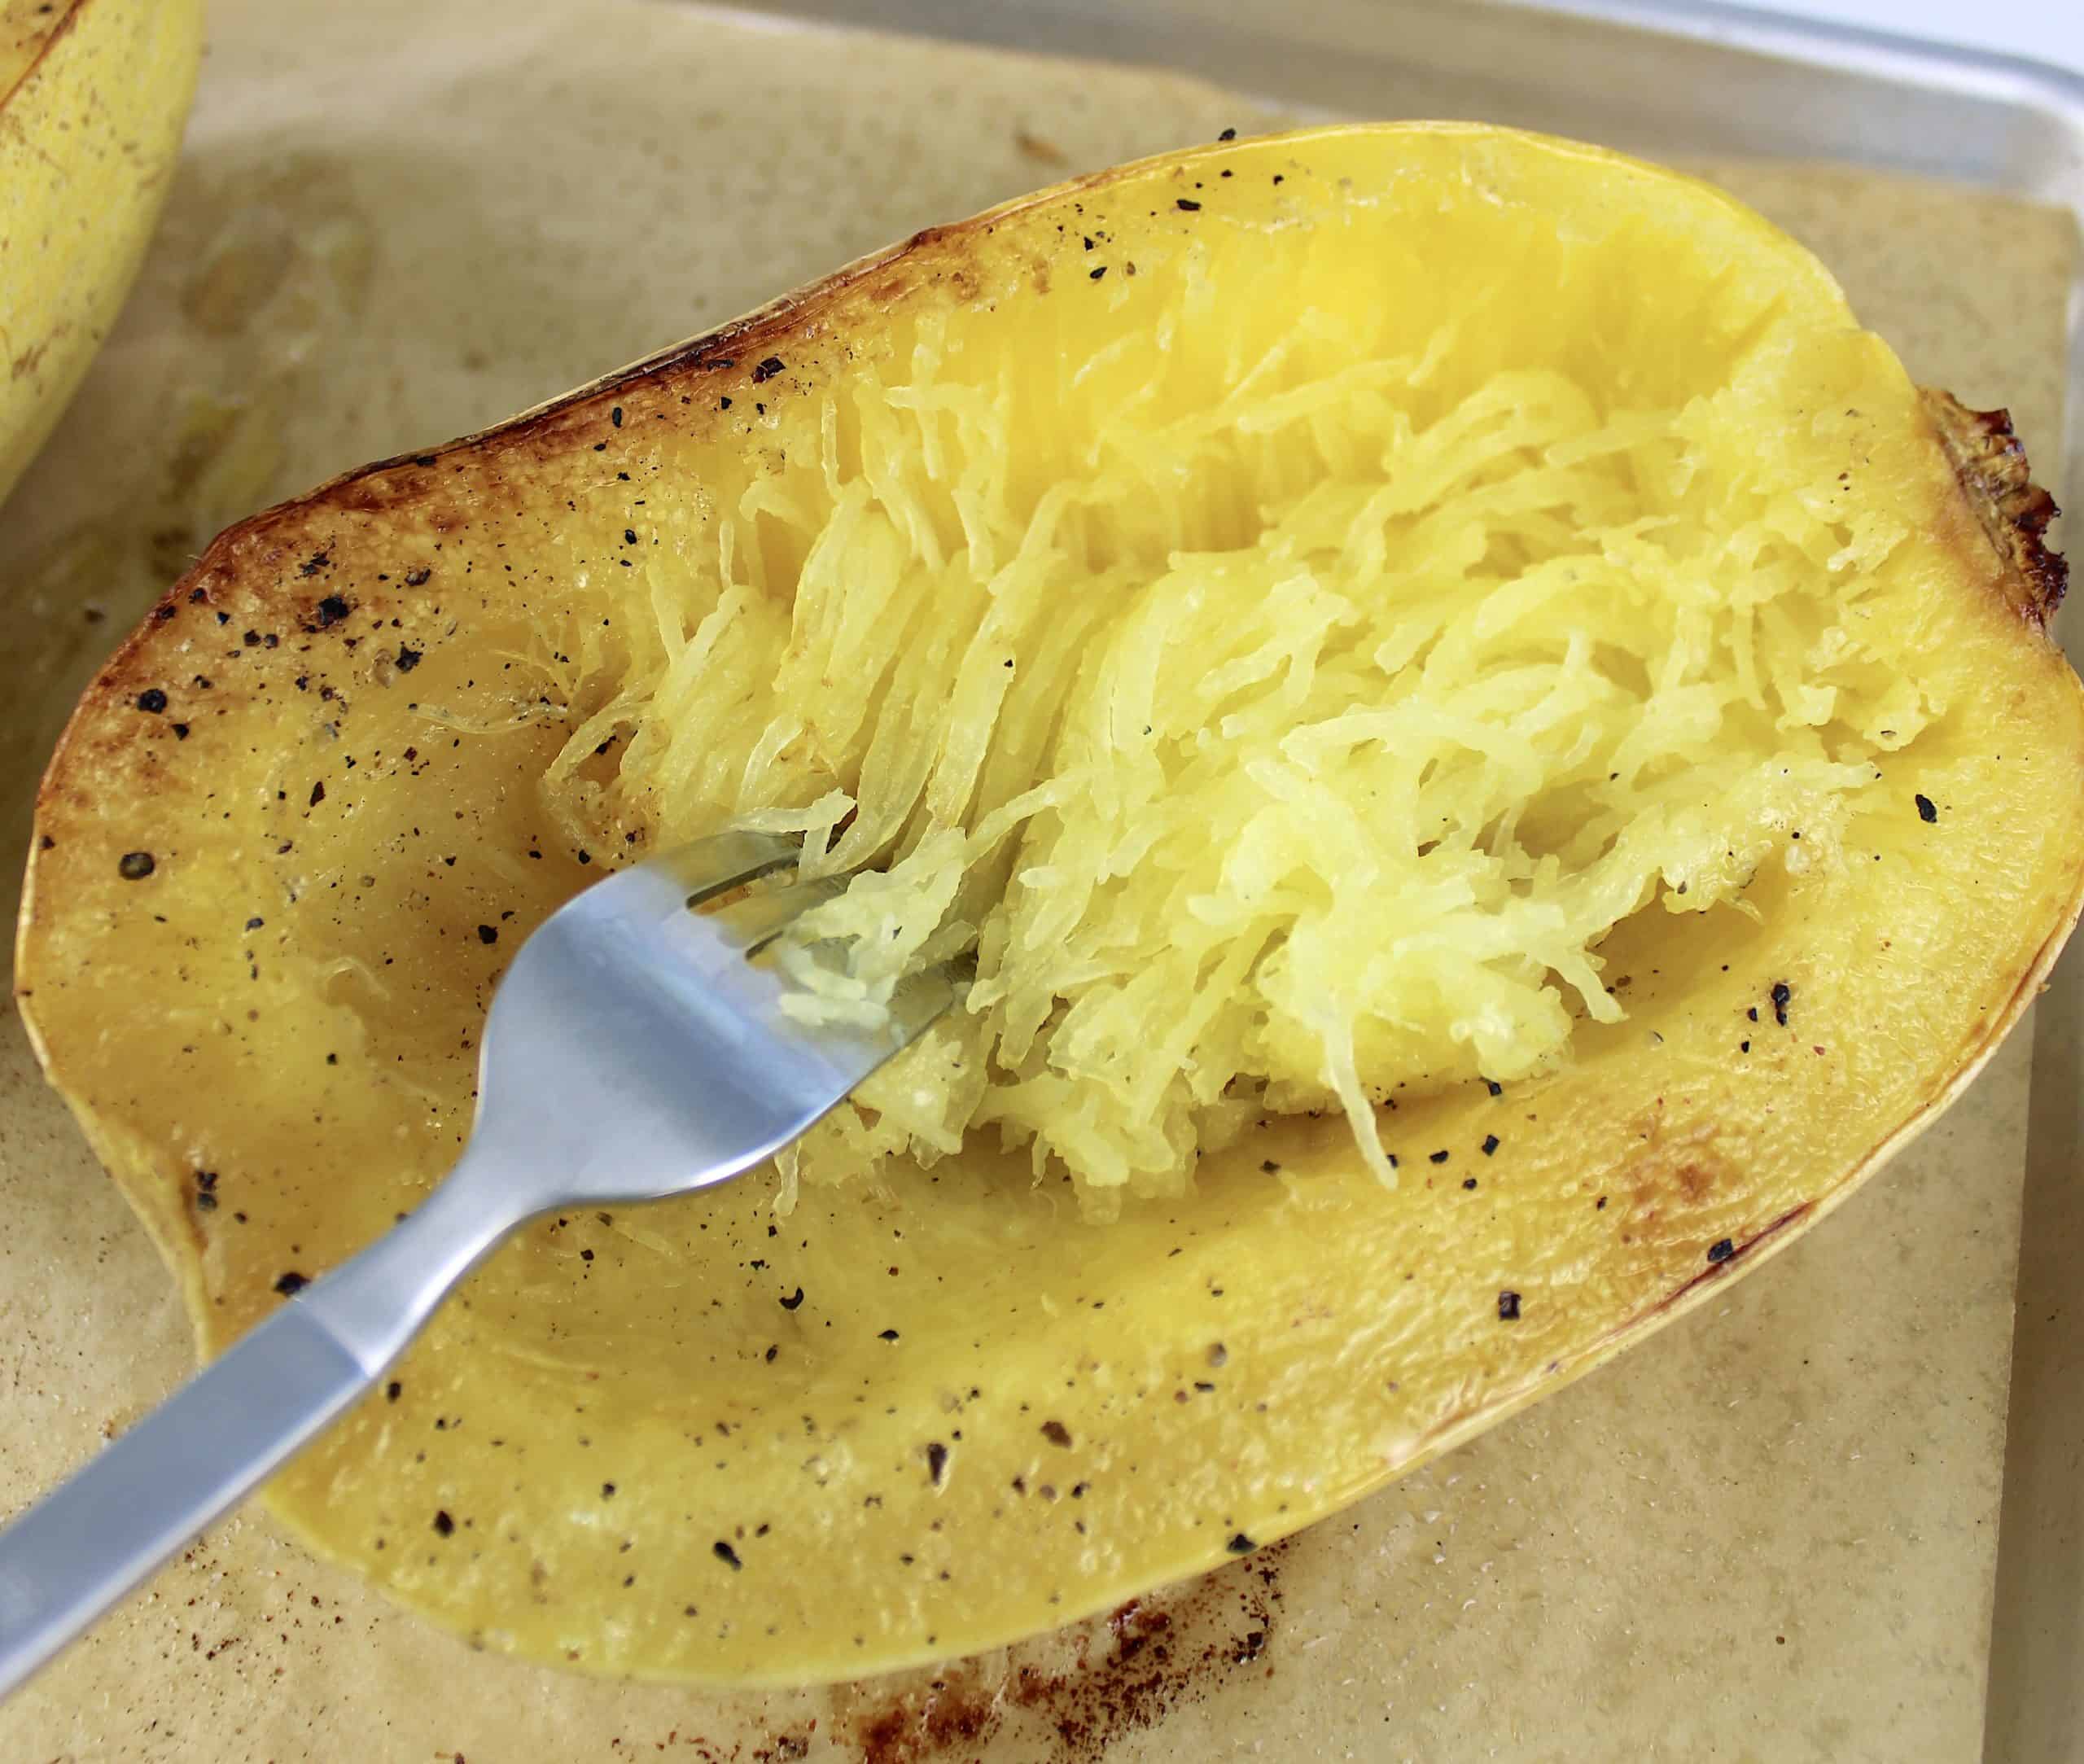 spaghetti squash being scraped with fork